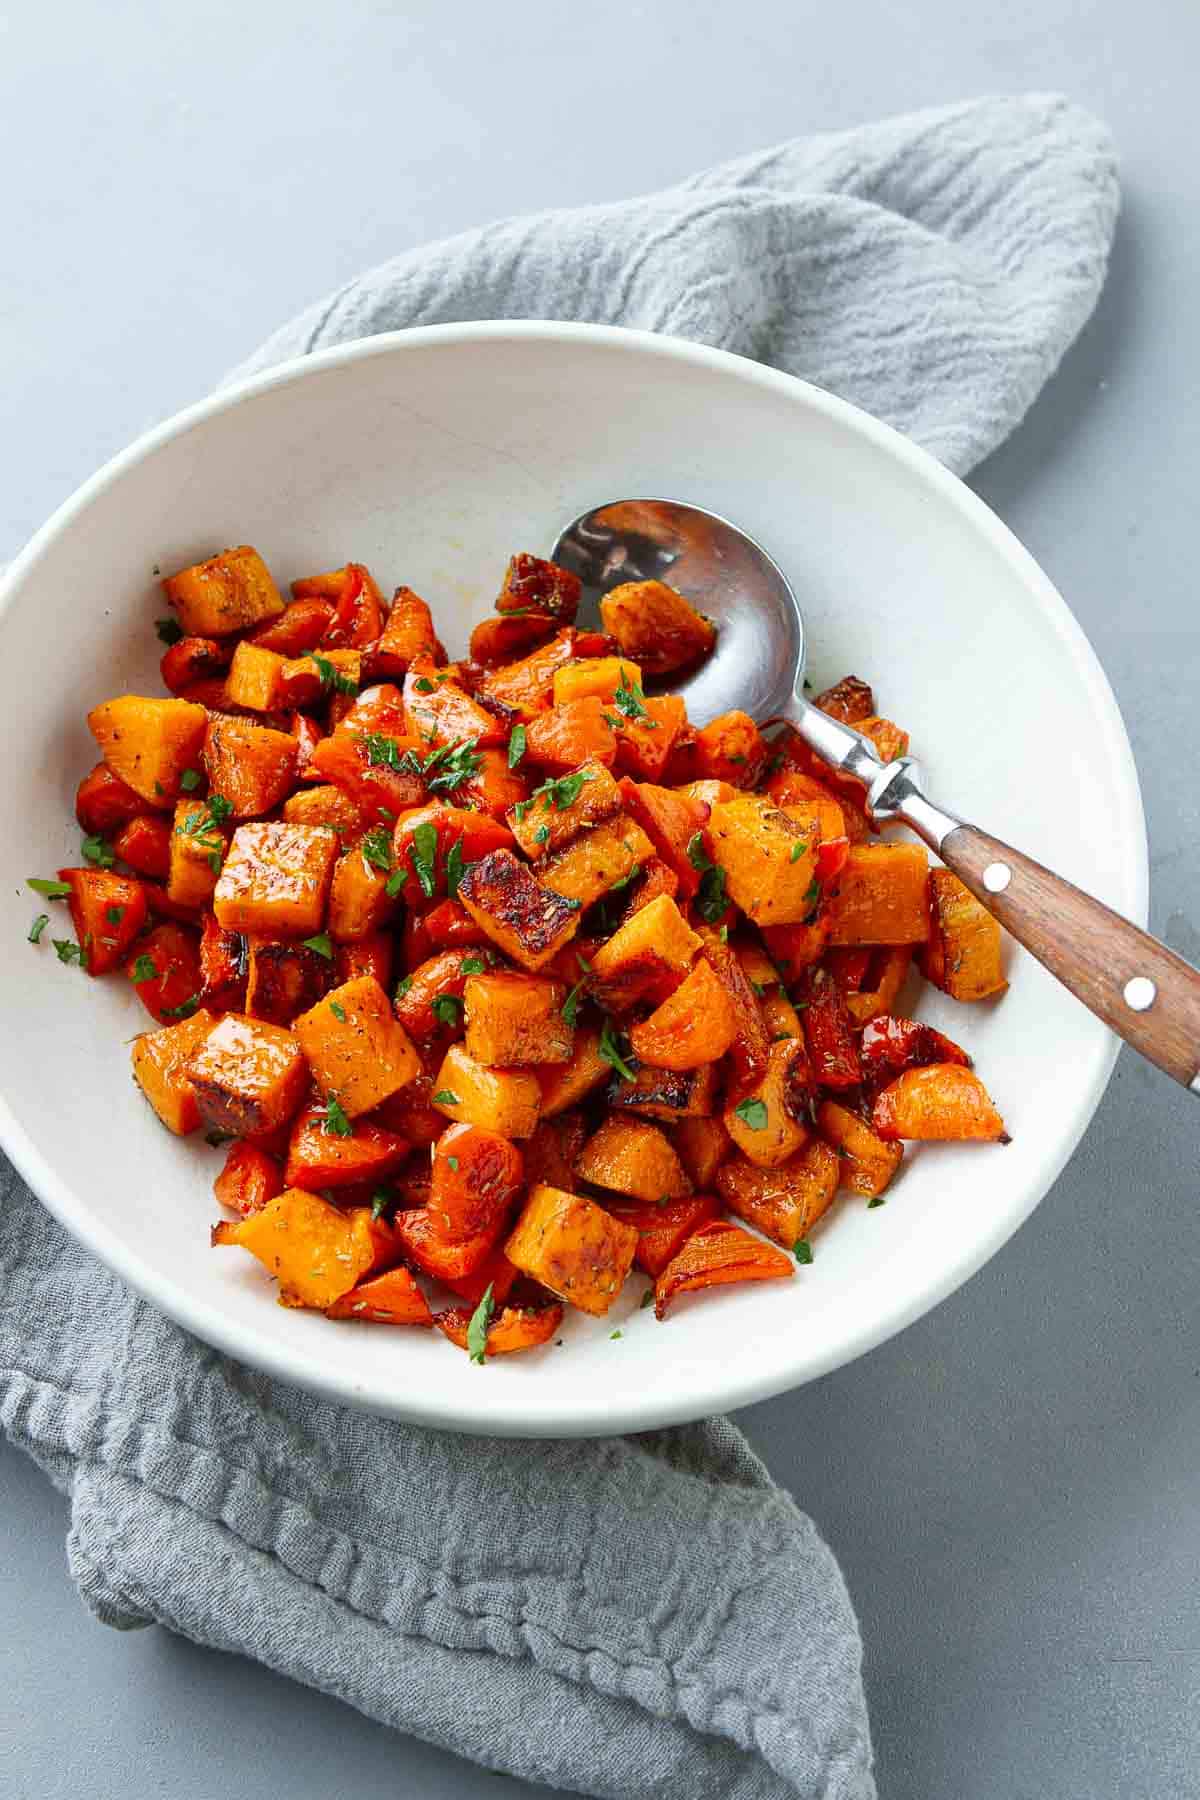 Chunks of cooked sweet potatoes and carrots in a white bowl with a spoon.